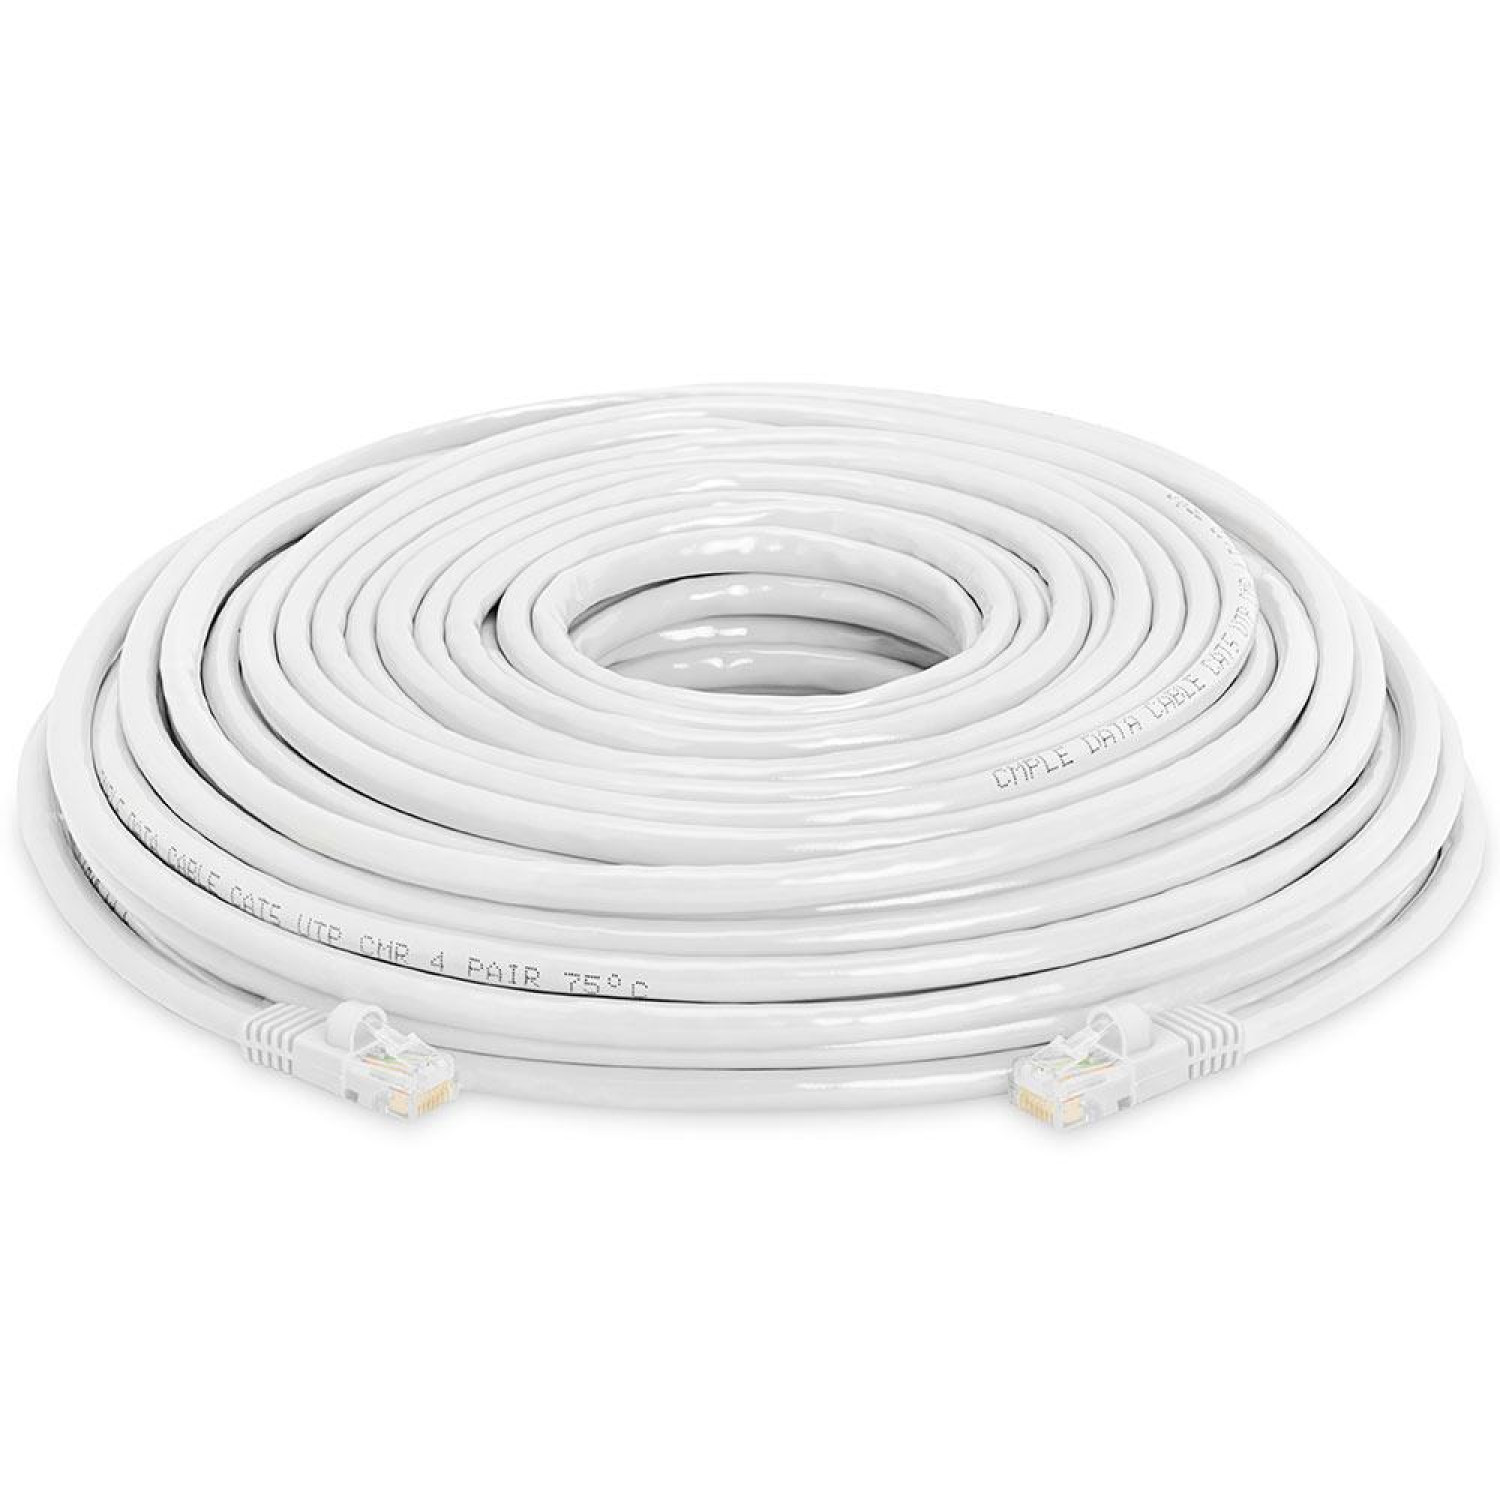 Cat5e Ethernet Network Patch Cable 350 MHz RJ45 100 Feet White